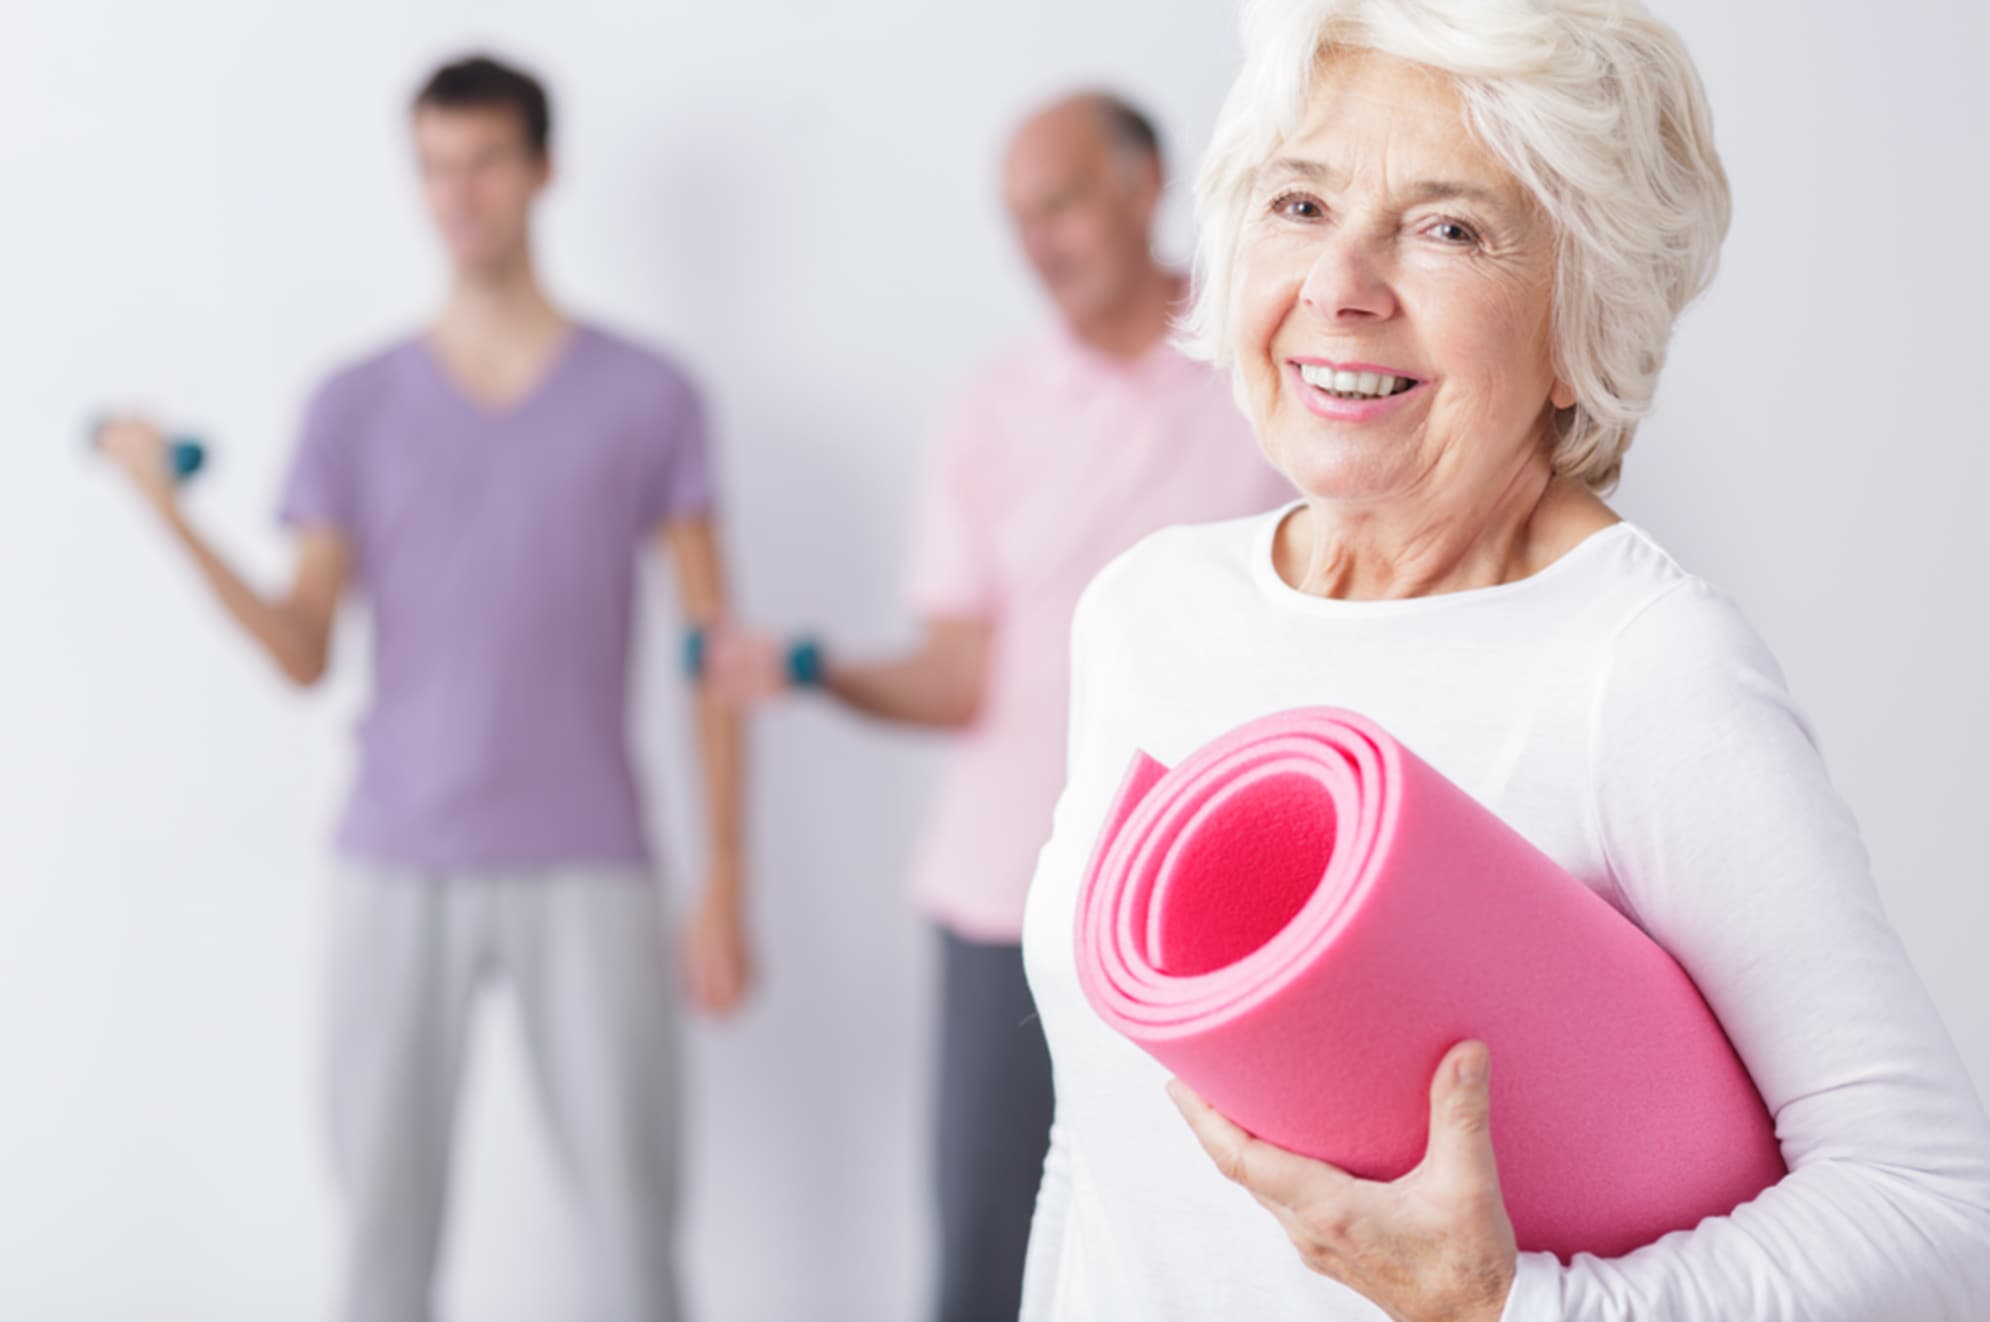 Holly Roser Fitness offers senior fitness classes for individuals and companies. Schedule a "Sit and be fit" class today.